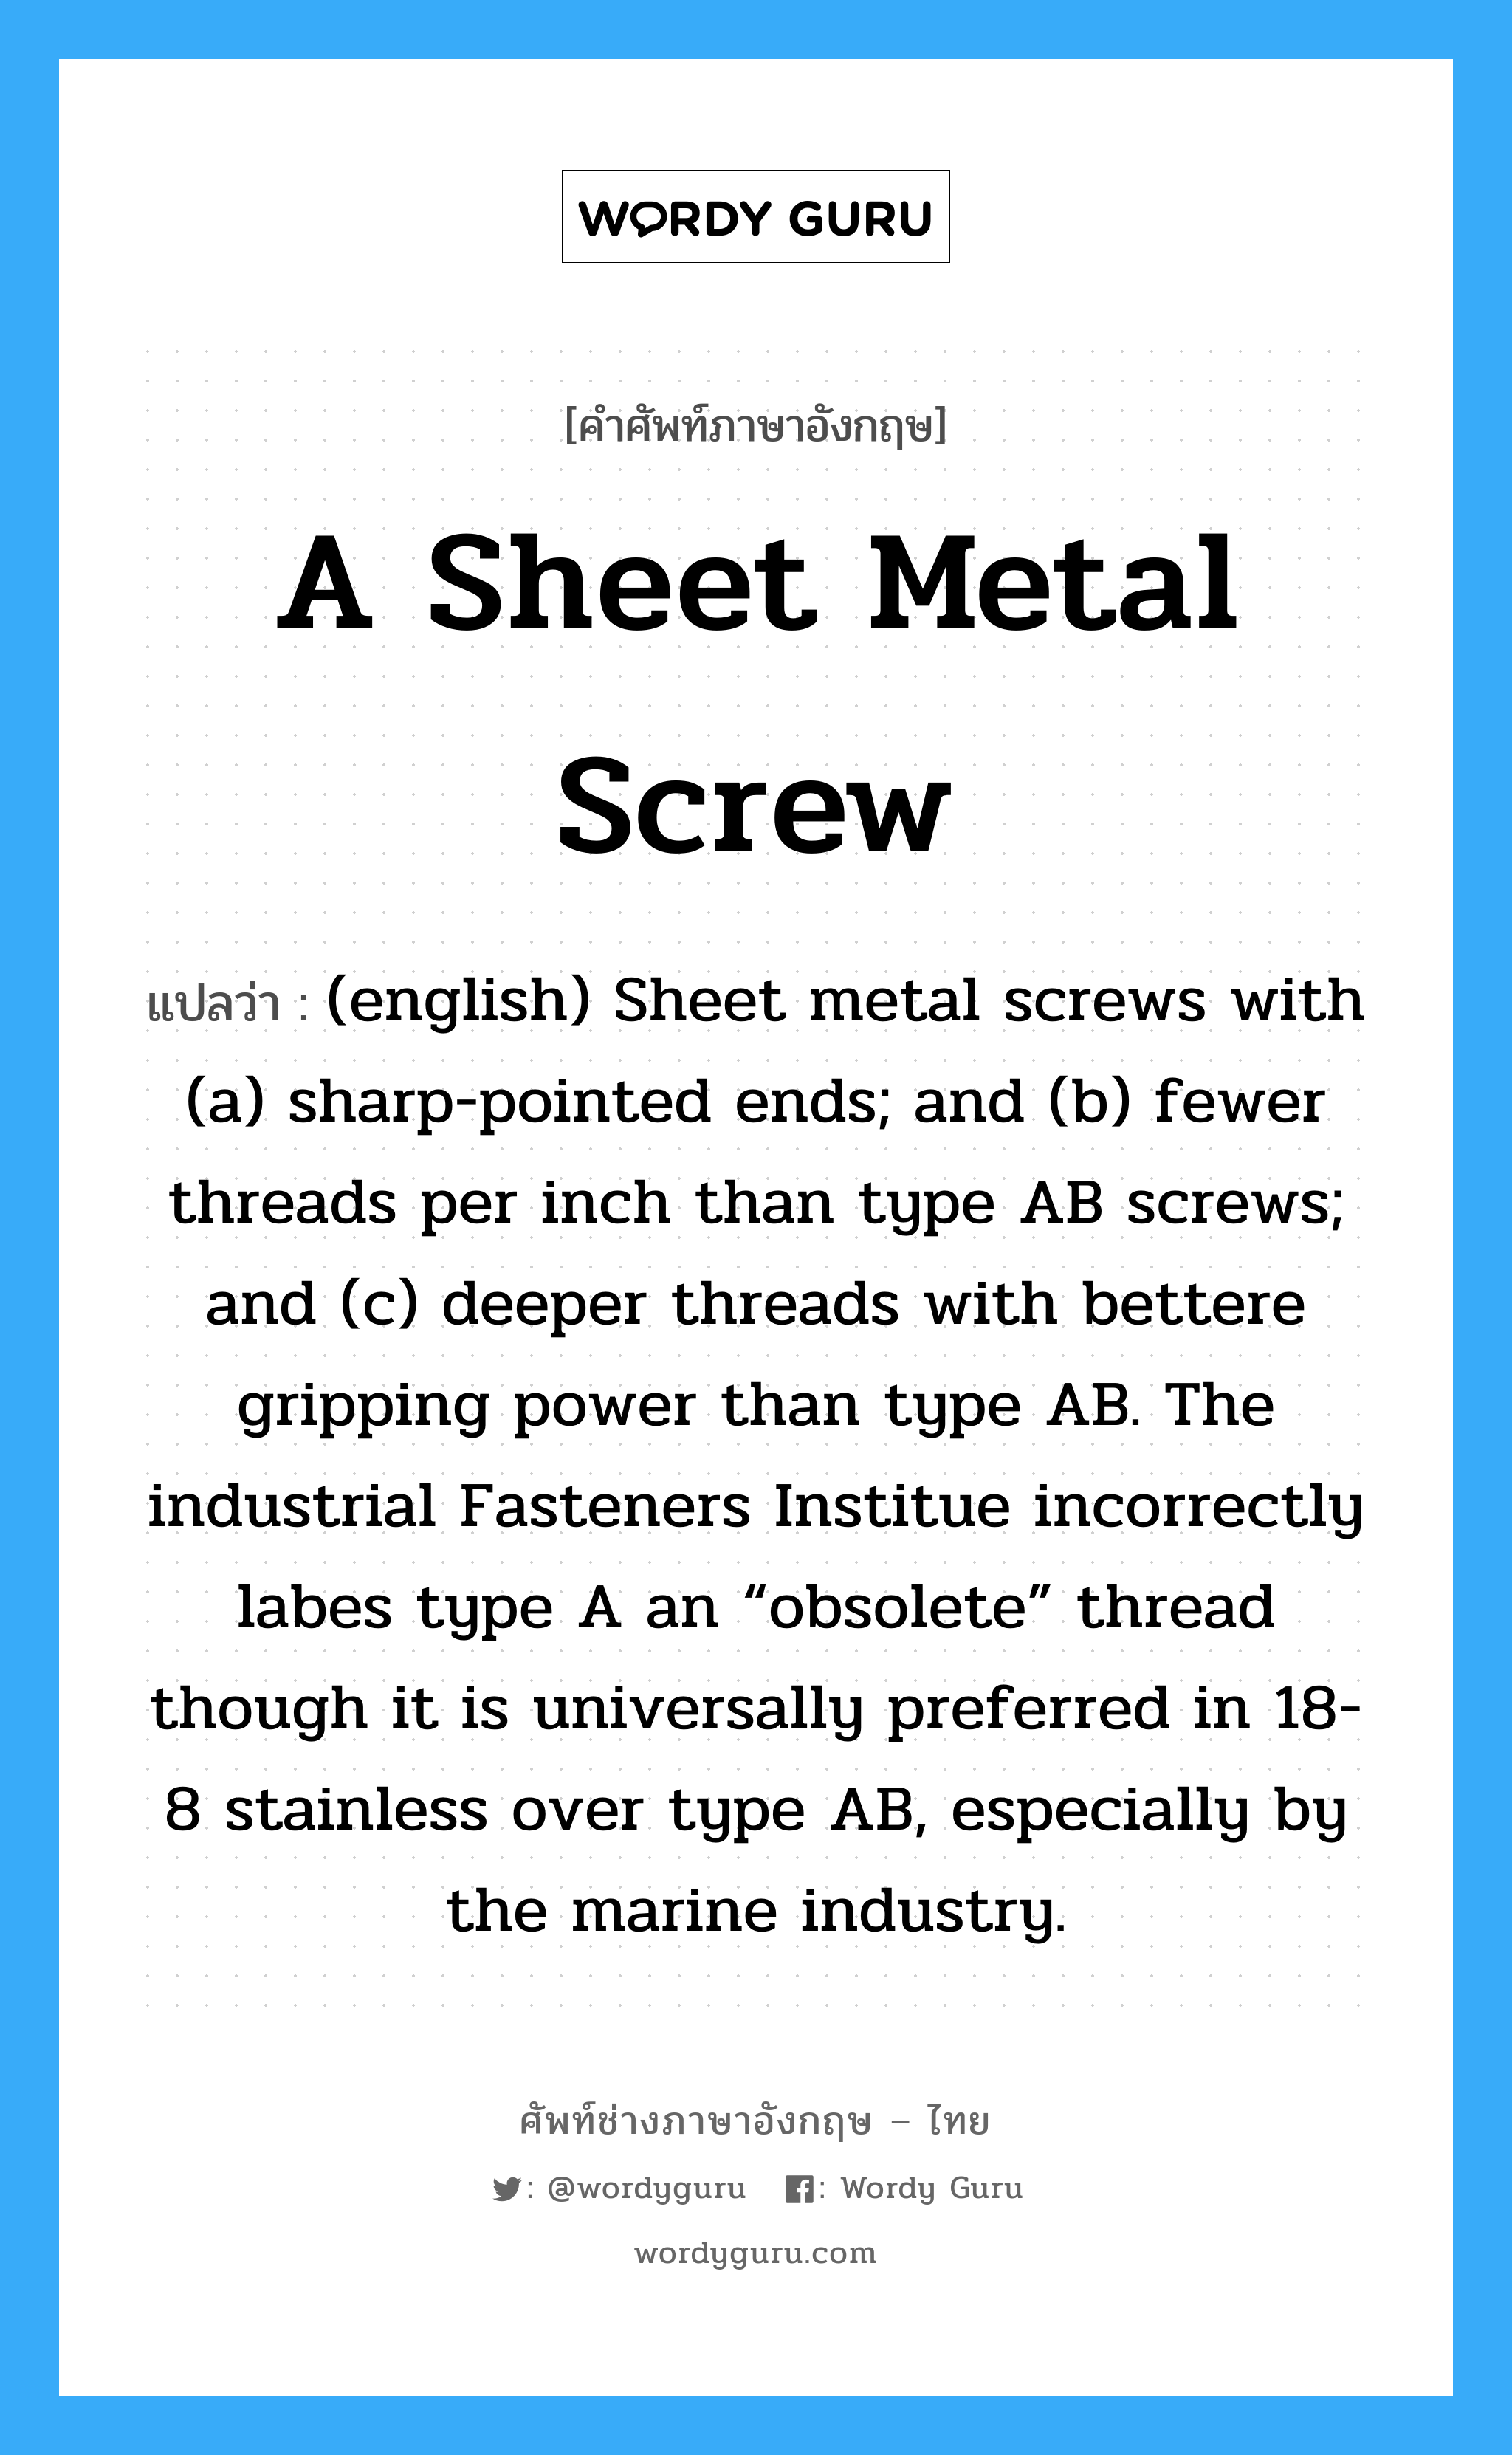 A Sheet Metal Screw แปลว่า?, คำศัพท์ช่างภาษาอังกฤษ - ไทย A Sheet Metal Screw คำศัพท์ภาษาอังกฤษ A Sheet Metal Screw แปลว่า (english) Sheet metal screws with (a) sharp-pointed ends; and (b) fewer threads per inch than type AB screws; and (c) deeper threads with bettere gripping power than type AB. The industrial Fasteners Institue incorrectly labes type A an “obsolete” thread though it is universally preferred in 18-8 stainless over type AB, especially by the marine industry.